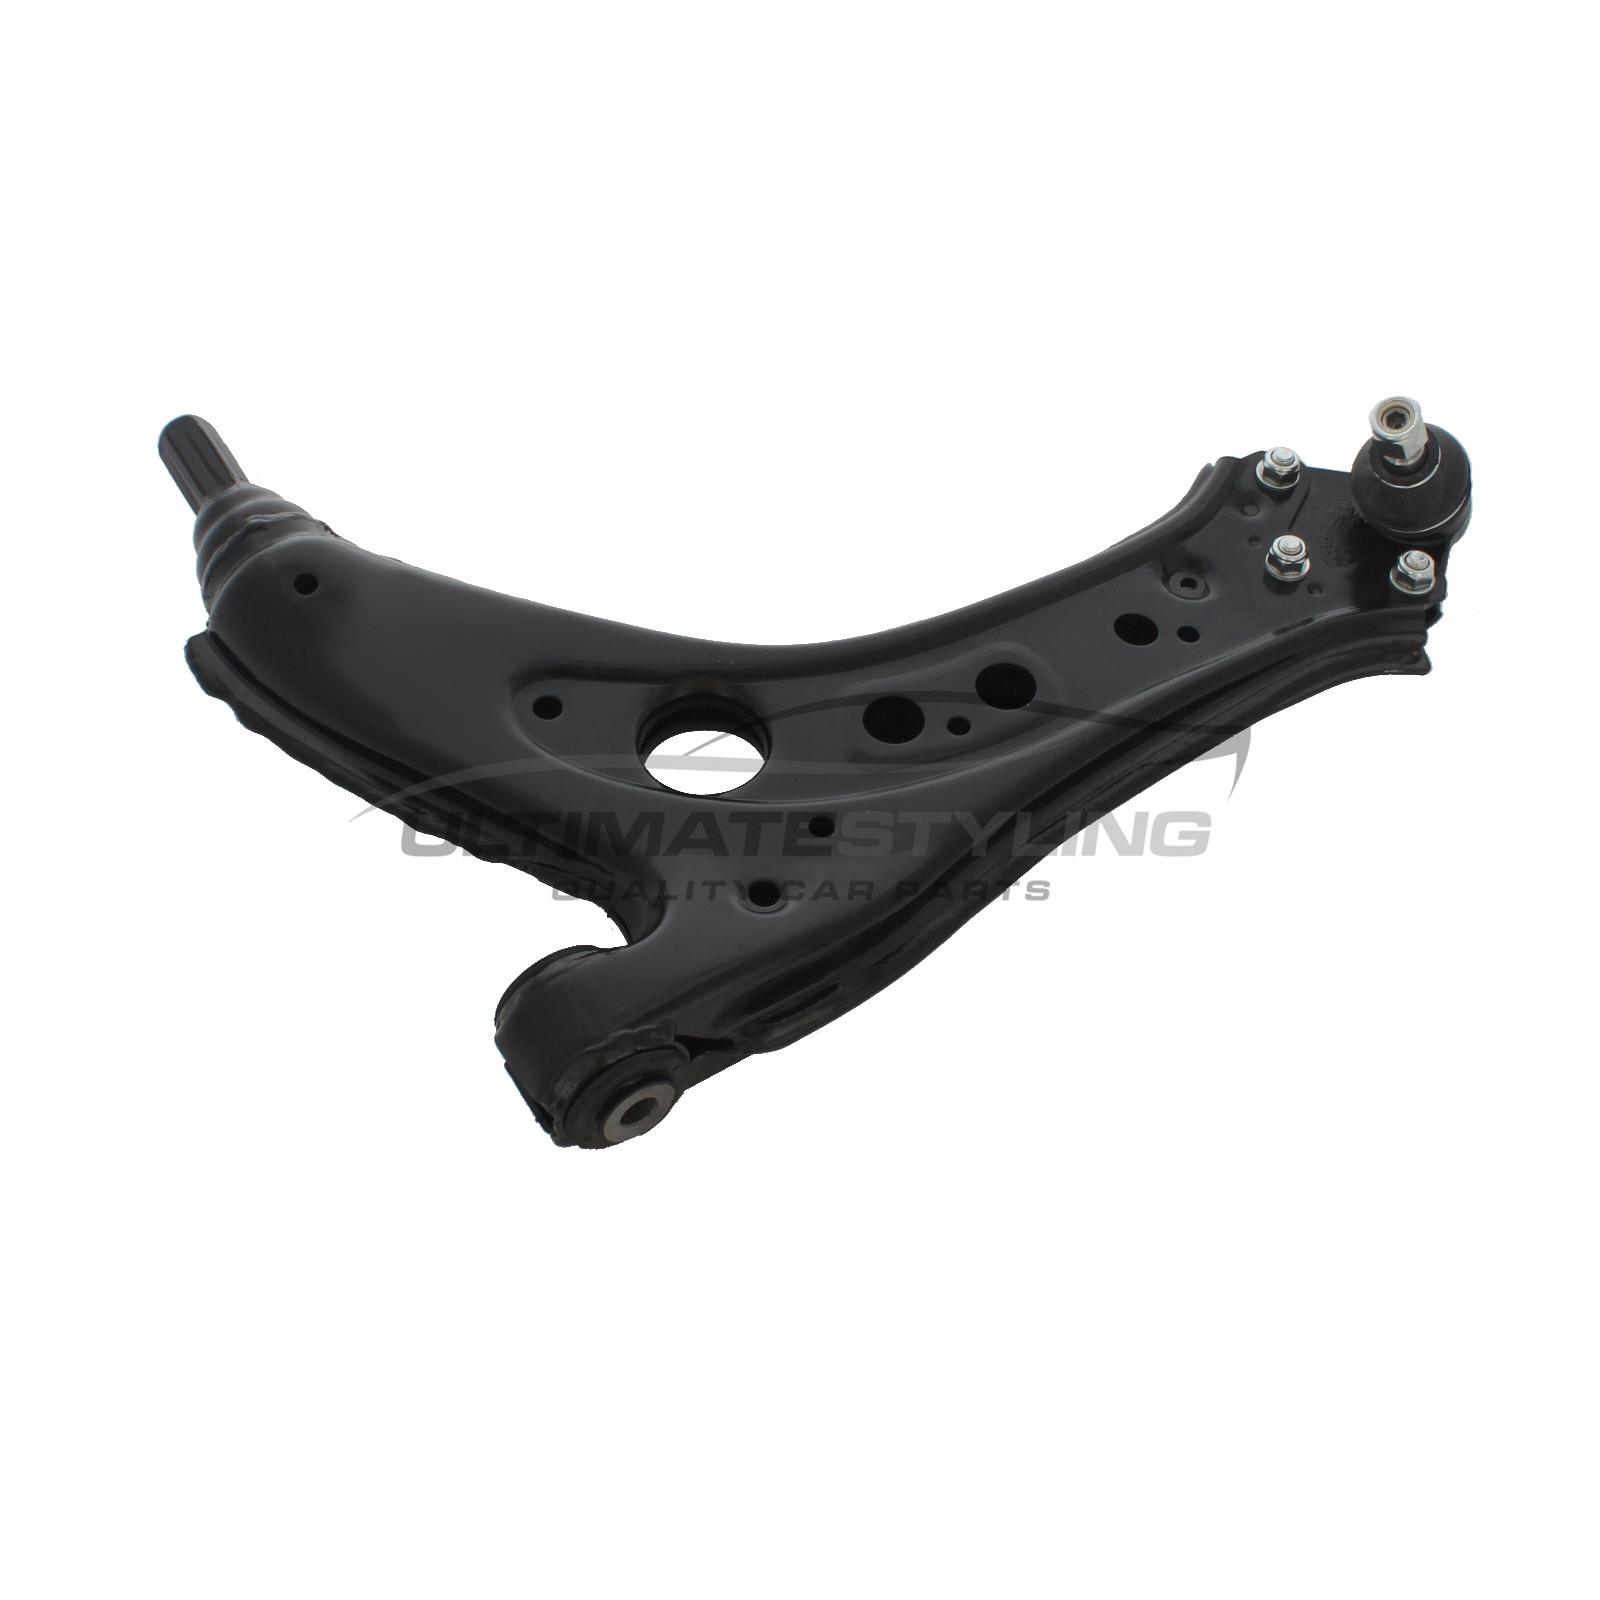 Seat Cordoba 2002-2006, Seat Ibiza 2002-2008, Skoda Fabia 2000-2010, Skoda Roomster 2006-2008, VW Fox 2006-2012, VW Polo 2002-2010 Front Lower Suspension Arm (Steel) Including Ball Joint Excluding Rear Bush Passenger Side (LH)